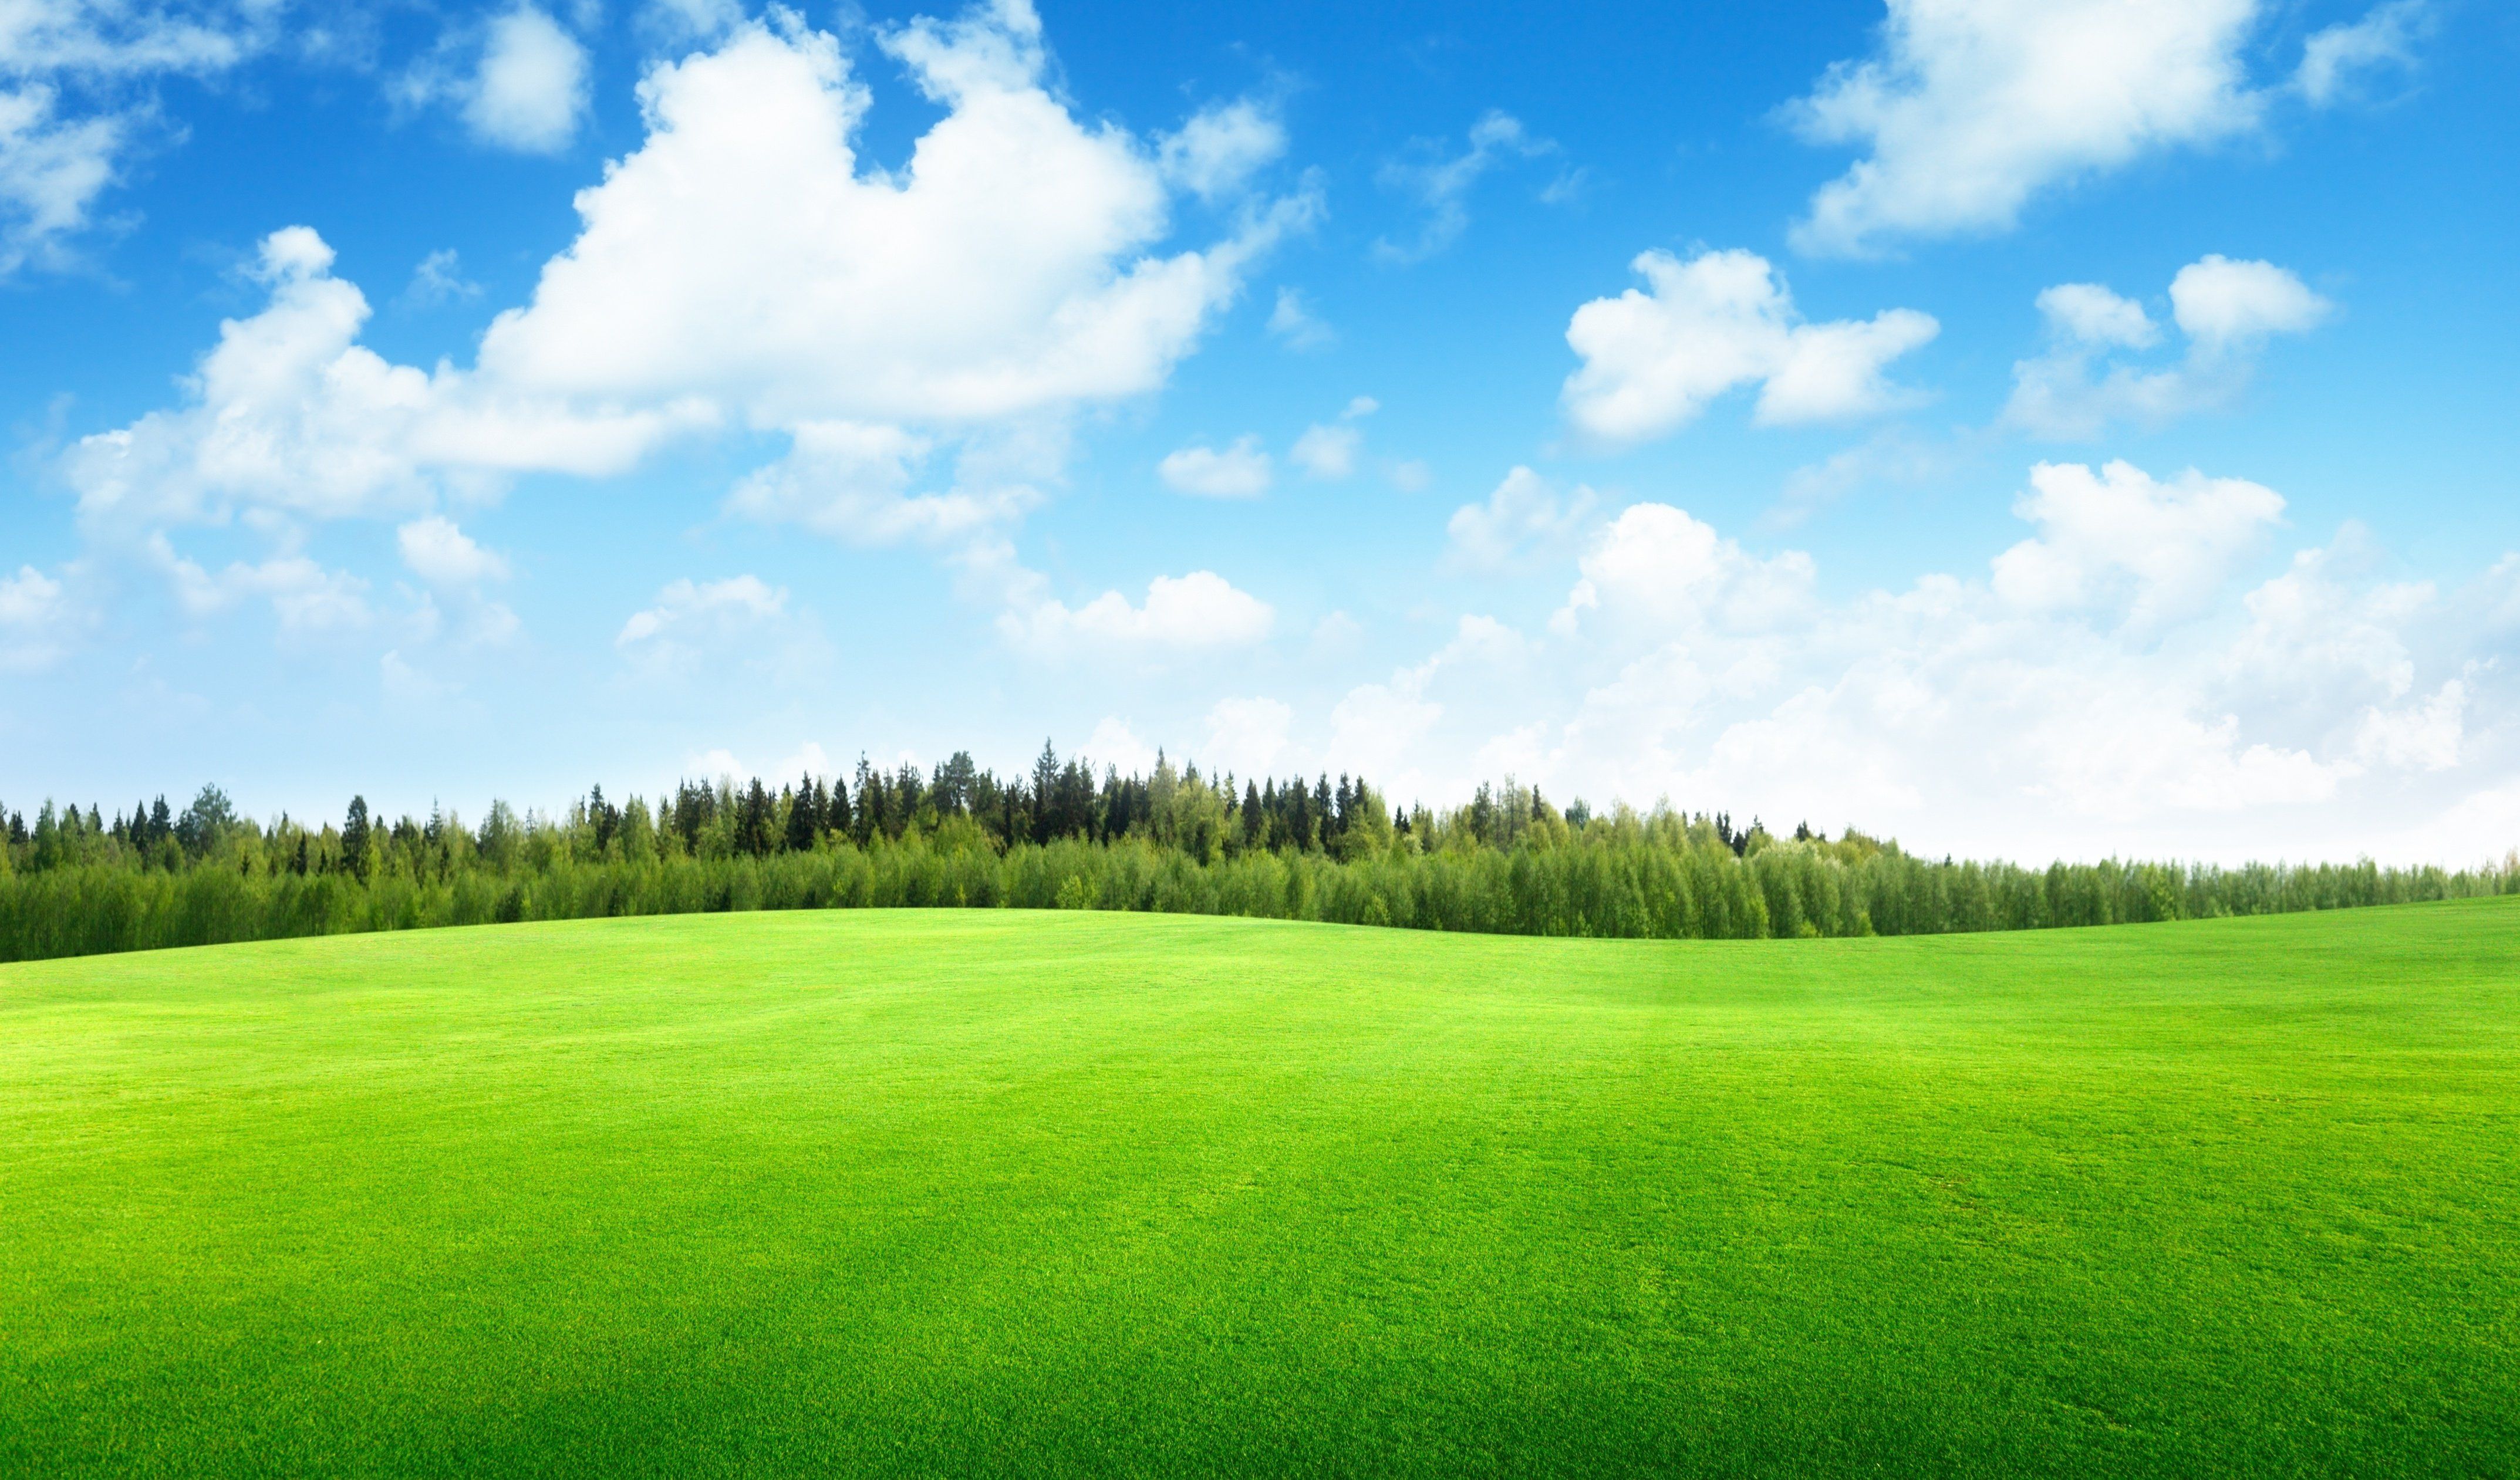 clouds, Trees, Field, Of, Grass, Beautiful, Nature, Landscape, Sky